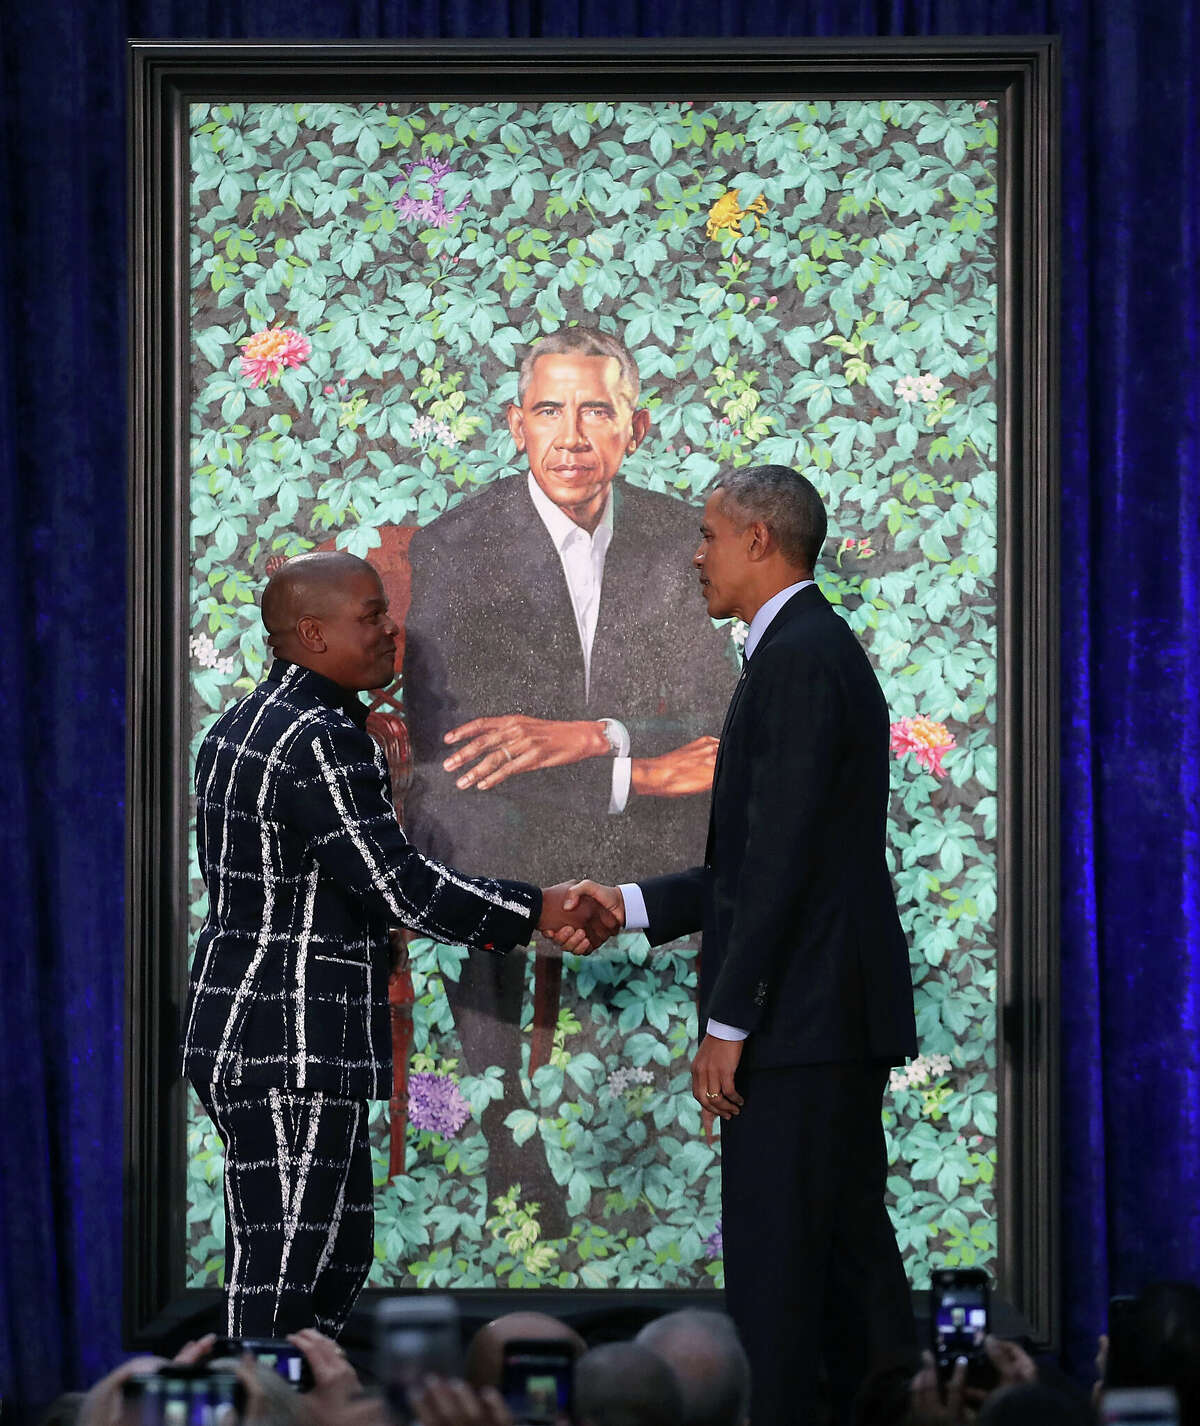 Former U.S. President Barack Obama stands artist Kehinde Wiley next to his newly unveiled portrait during a ceremony at the Smithsonian's National Portrait Gallery, on February 12, 2018 in Washington, DC. The portraits were commissioned by the Gallery, for Kehinde Wiley to create President Obama's portrait, and Amy Sherald that of Michelle Obama. 